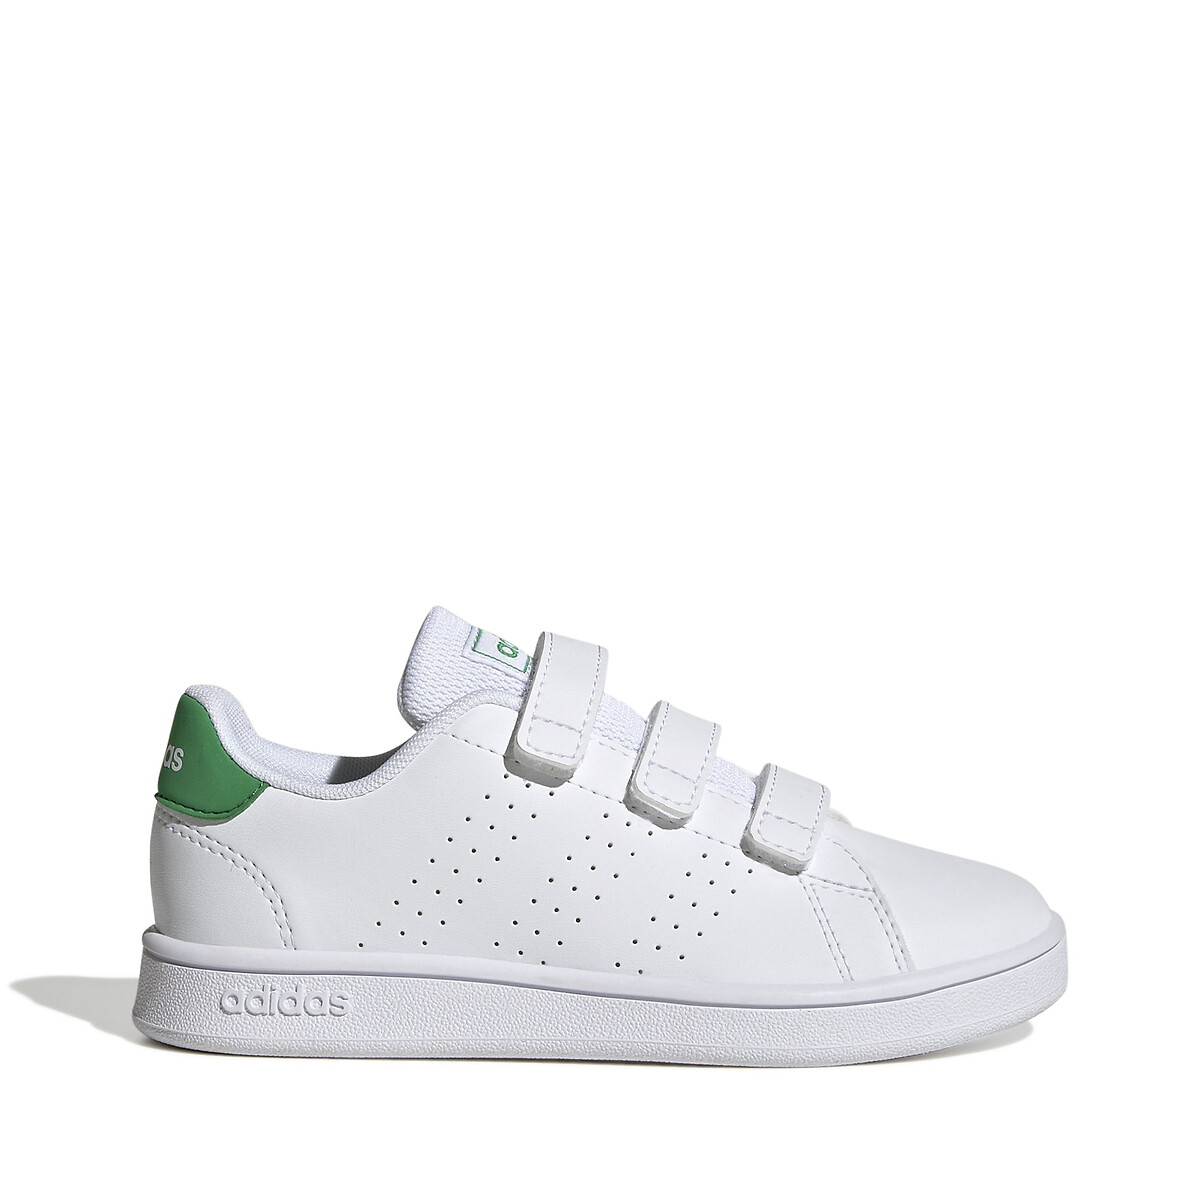 Kids advantage trainers with touch 'n' close fastening, white, Adidas ...